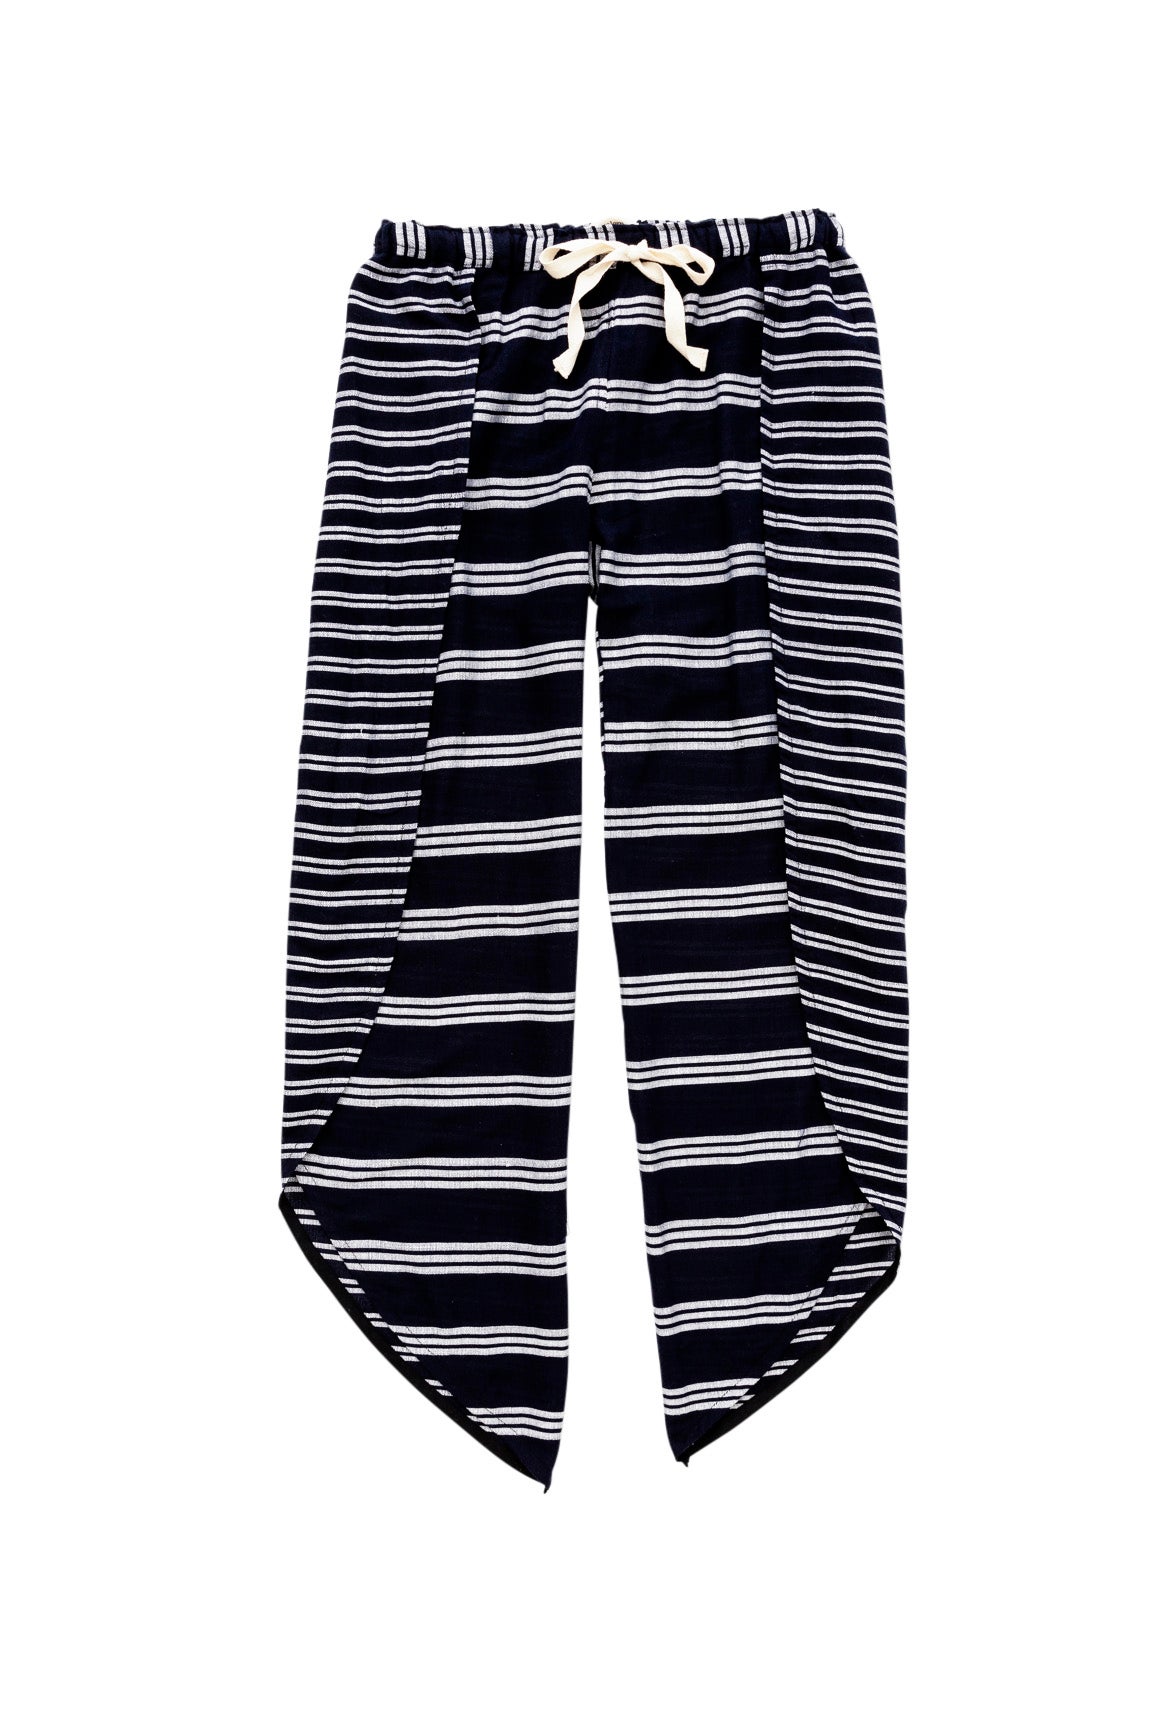 Spring Stunners: Take Your Spring Wardrobe to the Next Level With These Fresh Stripes